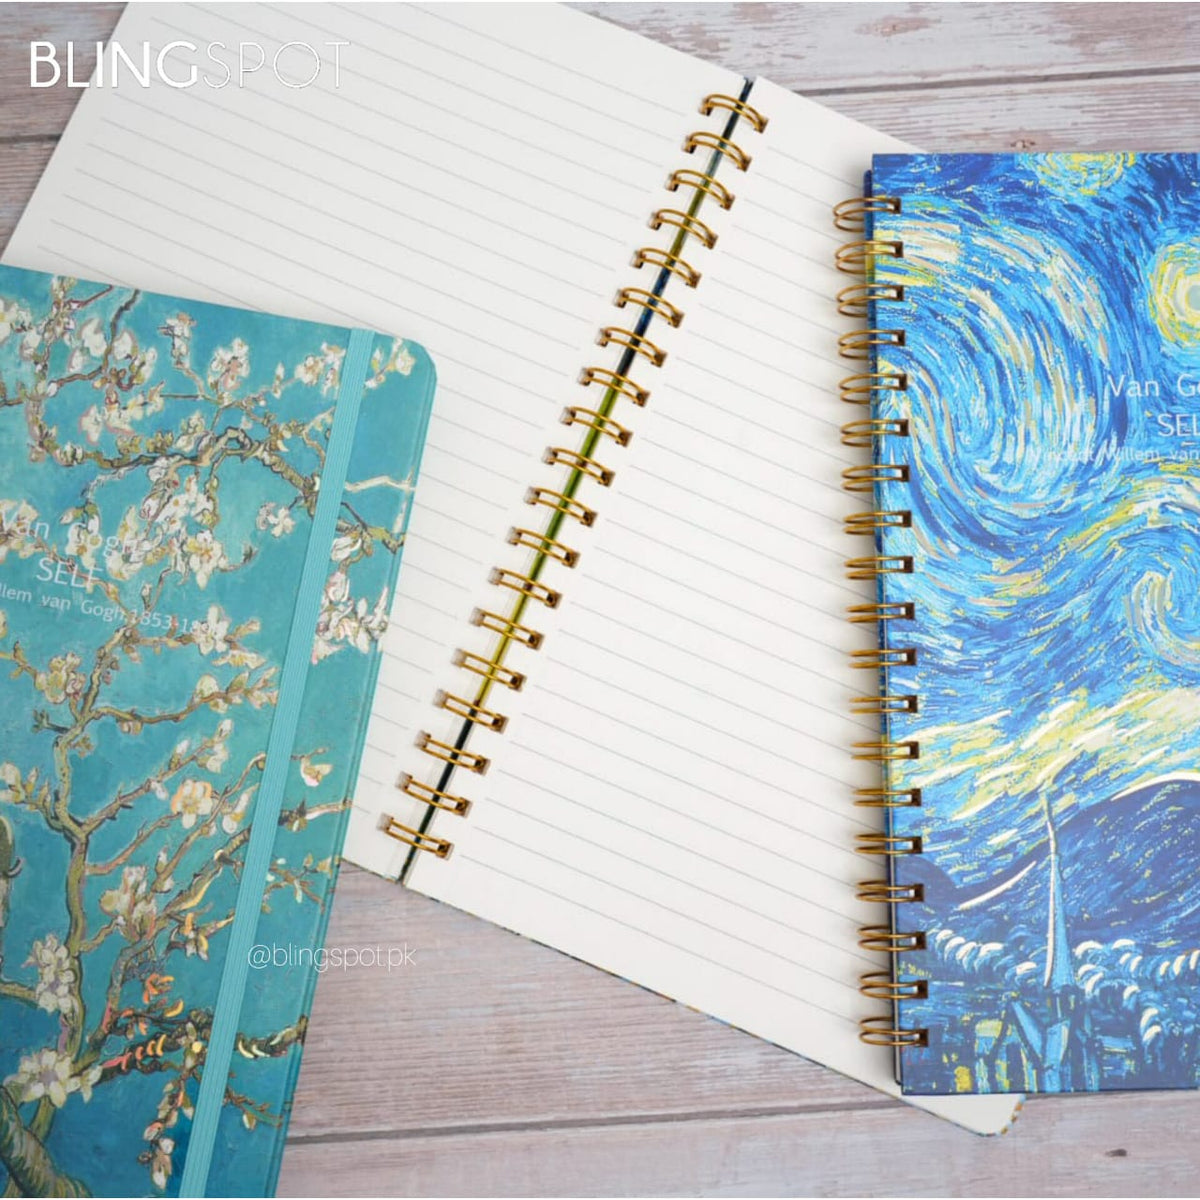 Van-Gogh Self Painting Large Foiled Spiral - Notebook / Journal